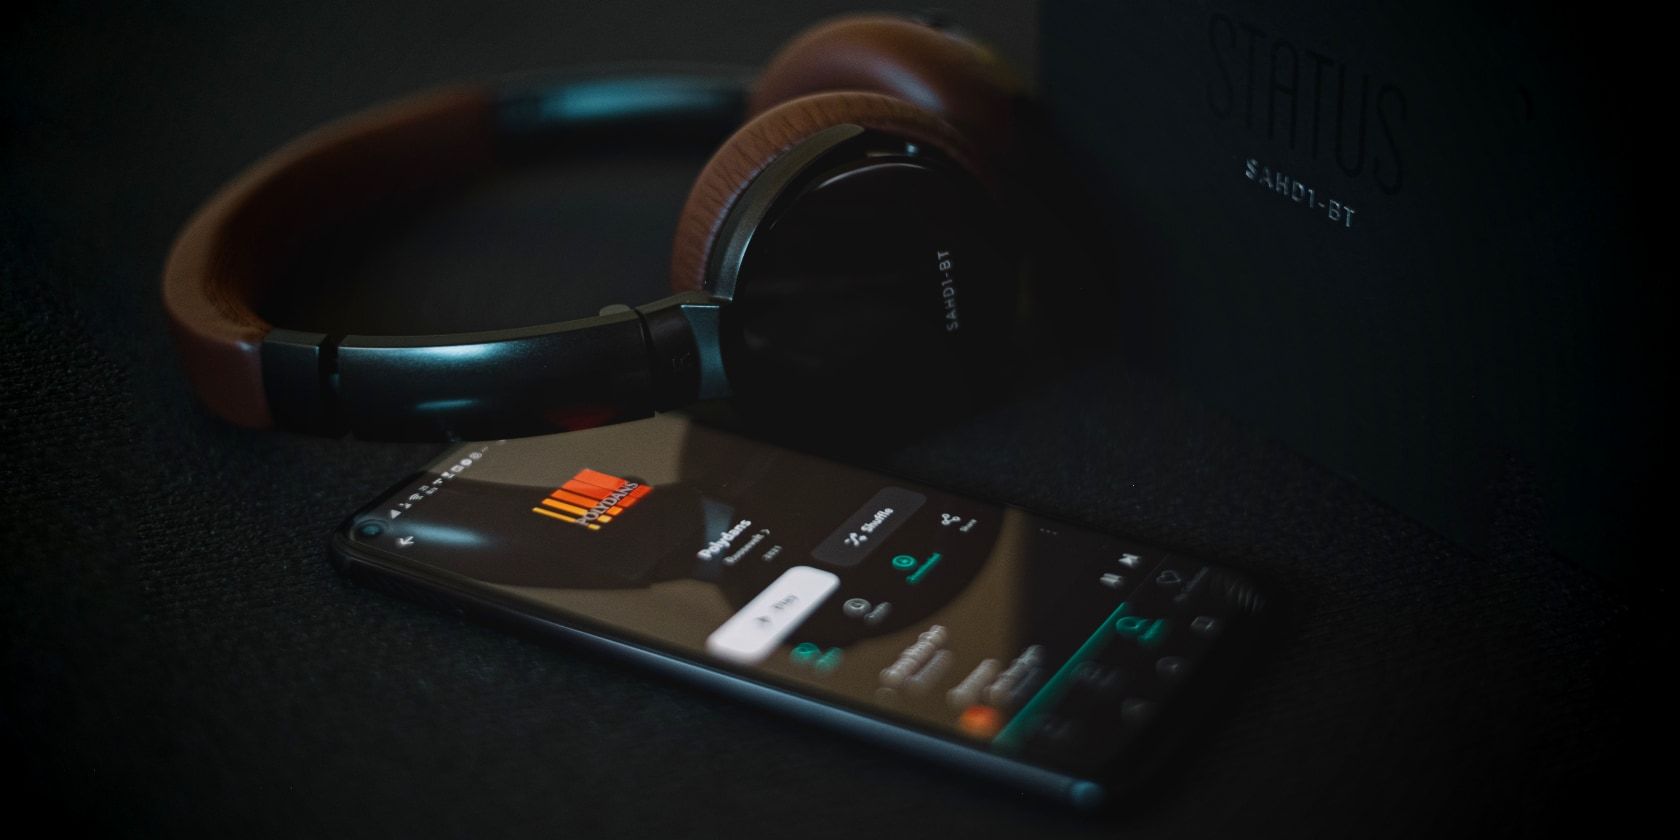 listening to music on an android smartphone